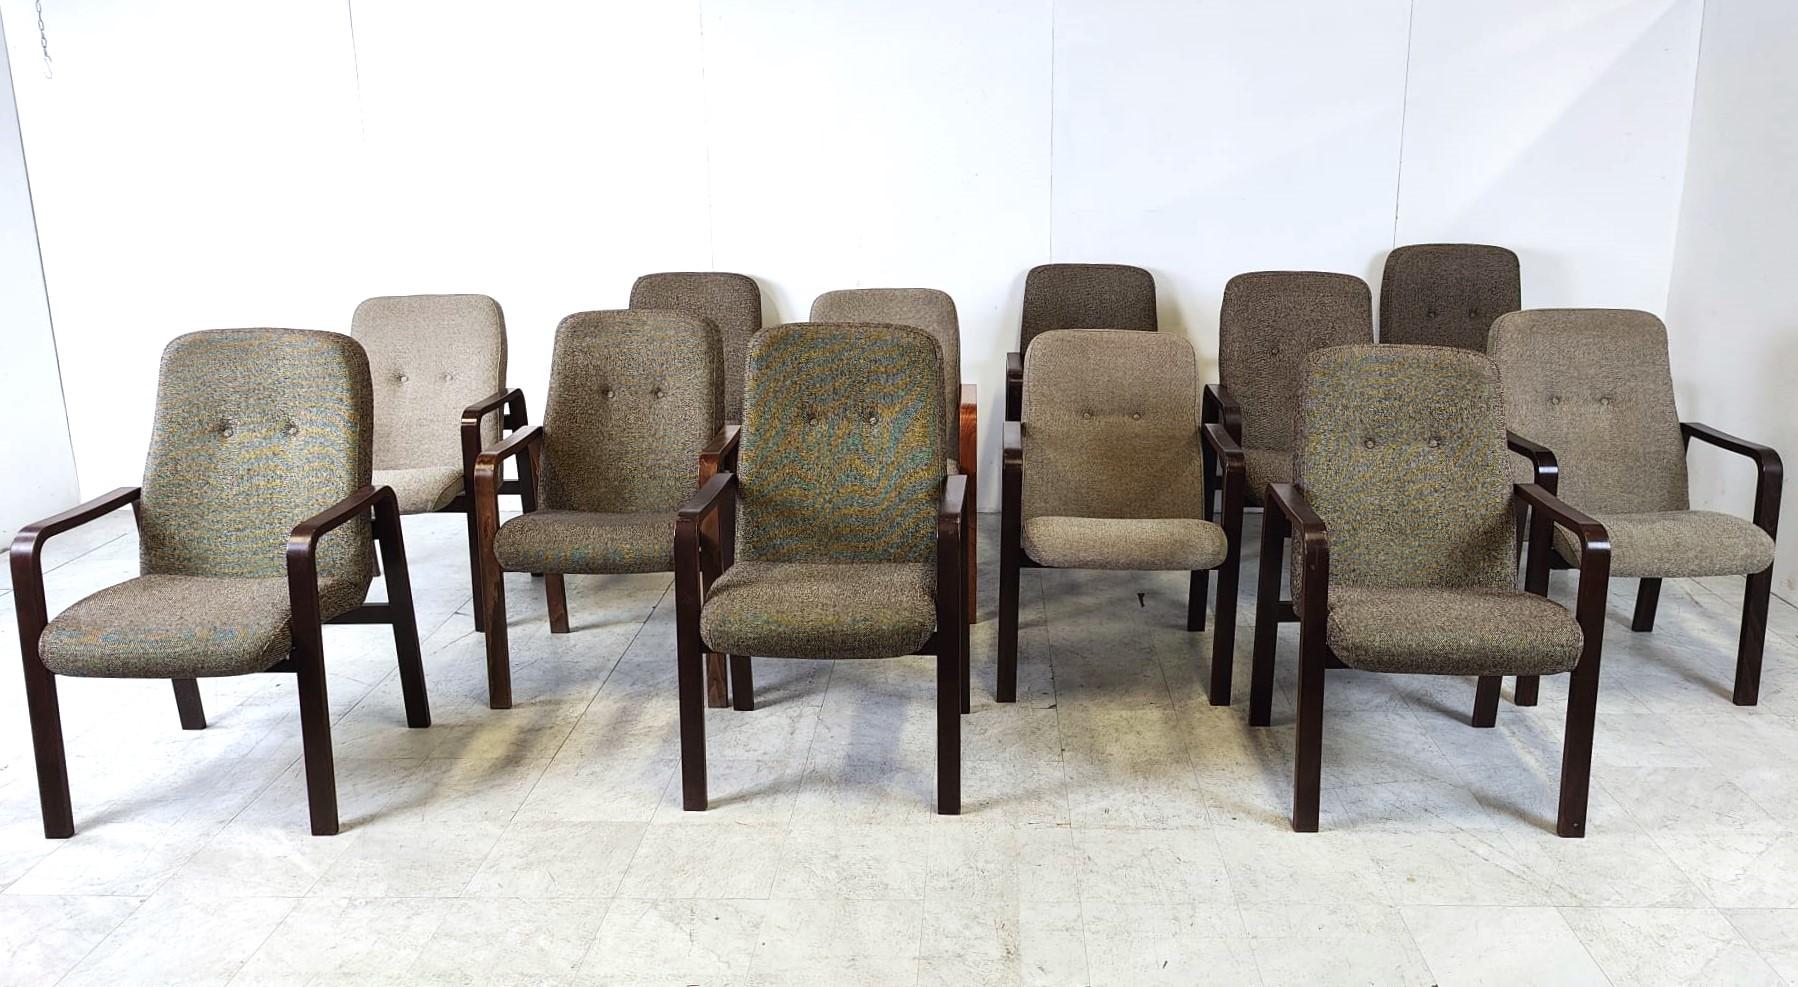 Vintage bent plywood armchairs with thick grey fabric cushions from the 1970s.

Very comfy chairs.

Can be used as conference chairs, dining chairs, or as side chairs in the living room.

Timeless design.

12 pieces in stock, price is per